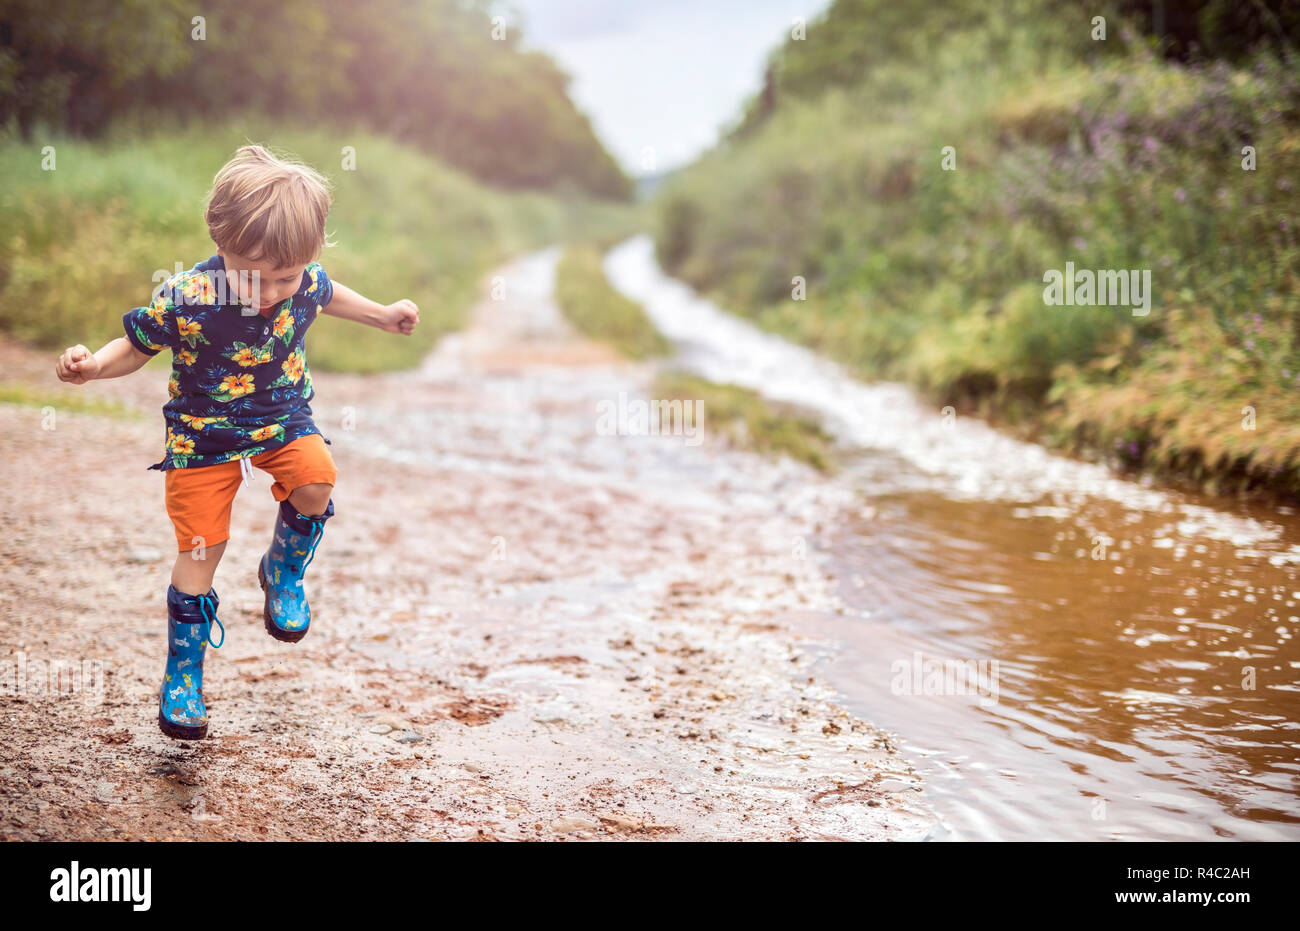 Boy with rubber boots enjoys rainy day in rural surrounding Stock Photo